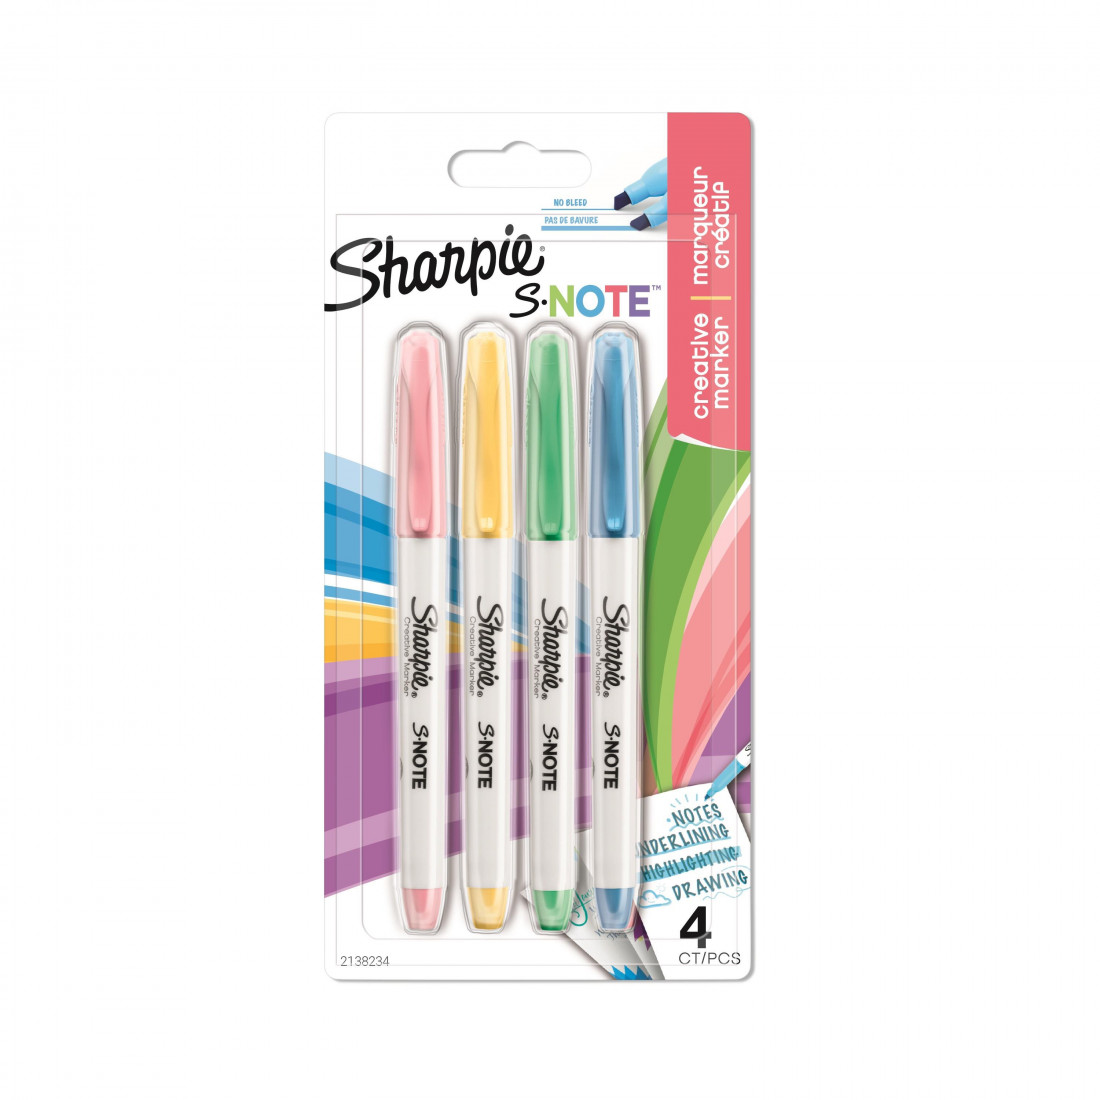 Sharpie S.NOTE creative markers 4 pcs